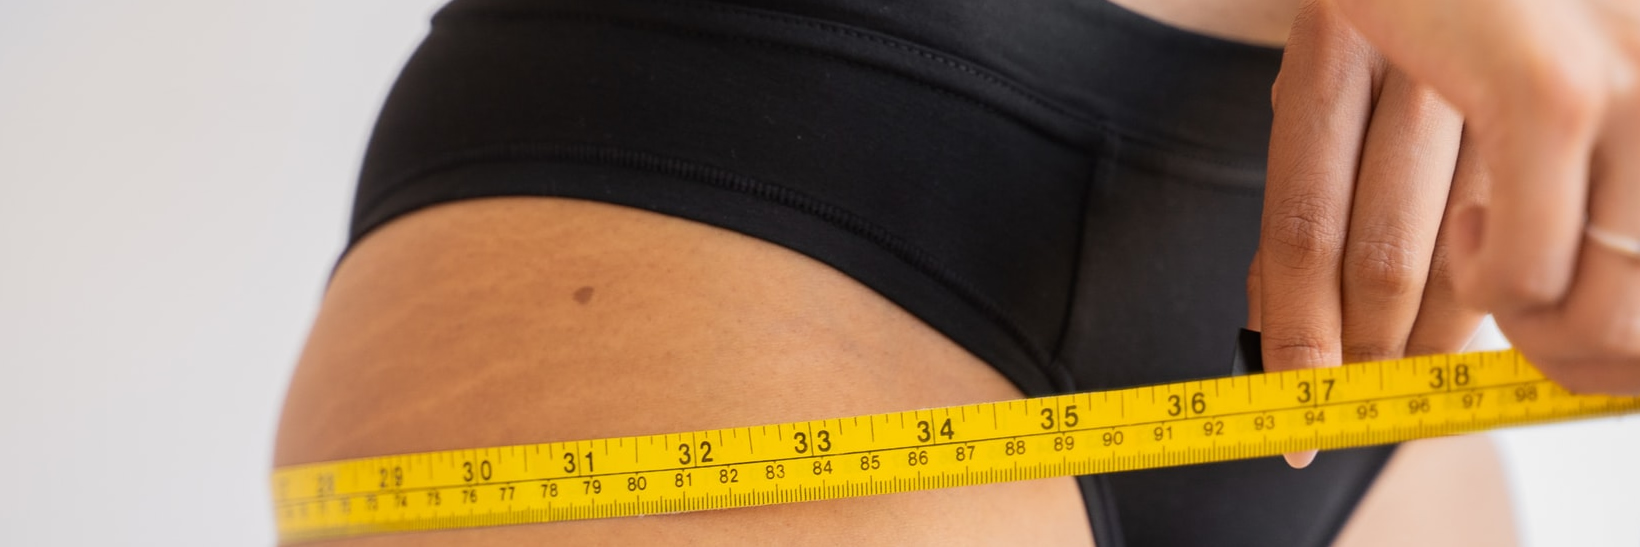 Lingerie Sizing and Measurement Charts - Joy of Clothes